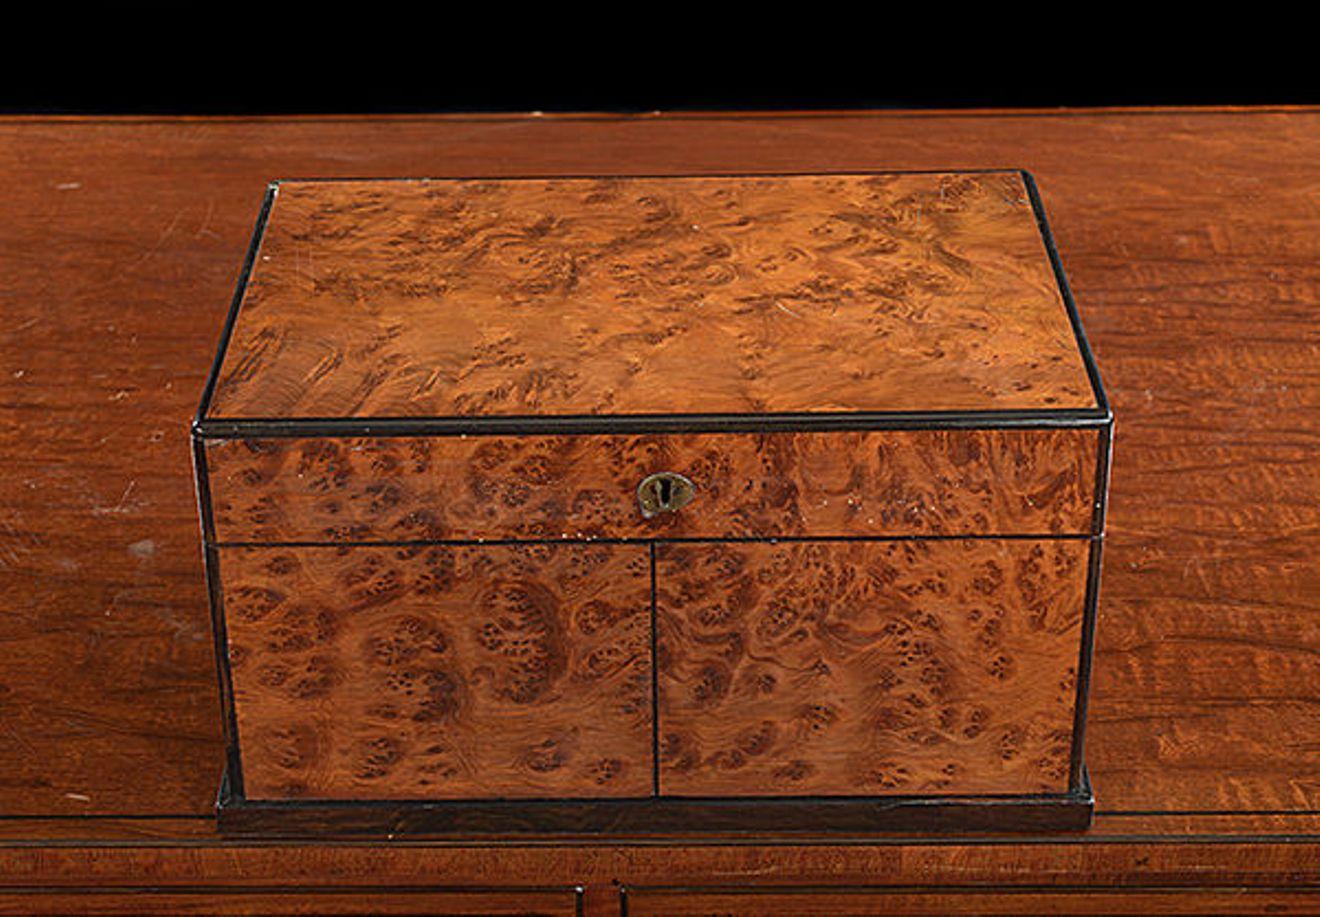 A Victorian burr yew wood and Coromandel box cabinet compendium of games which includes cribbage, chess, draughts and cards.
The rising lid with a folding chess board stored inside: the pair of fold back doors to the front store the chess pieces